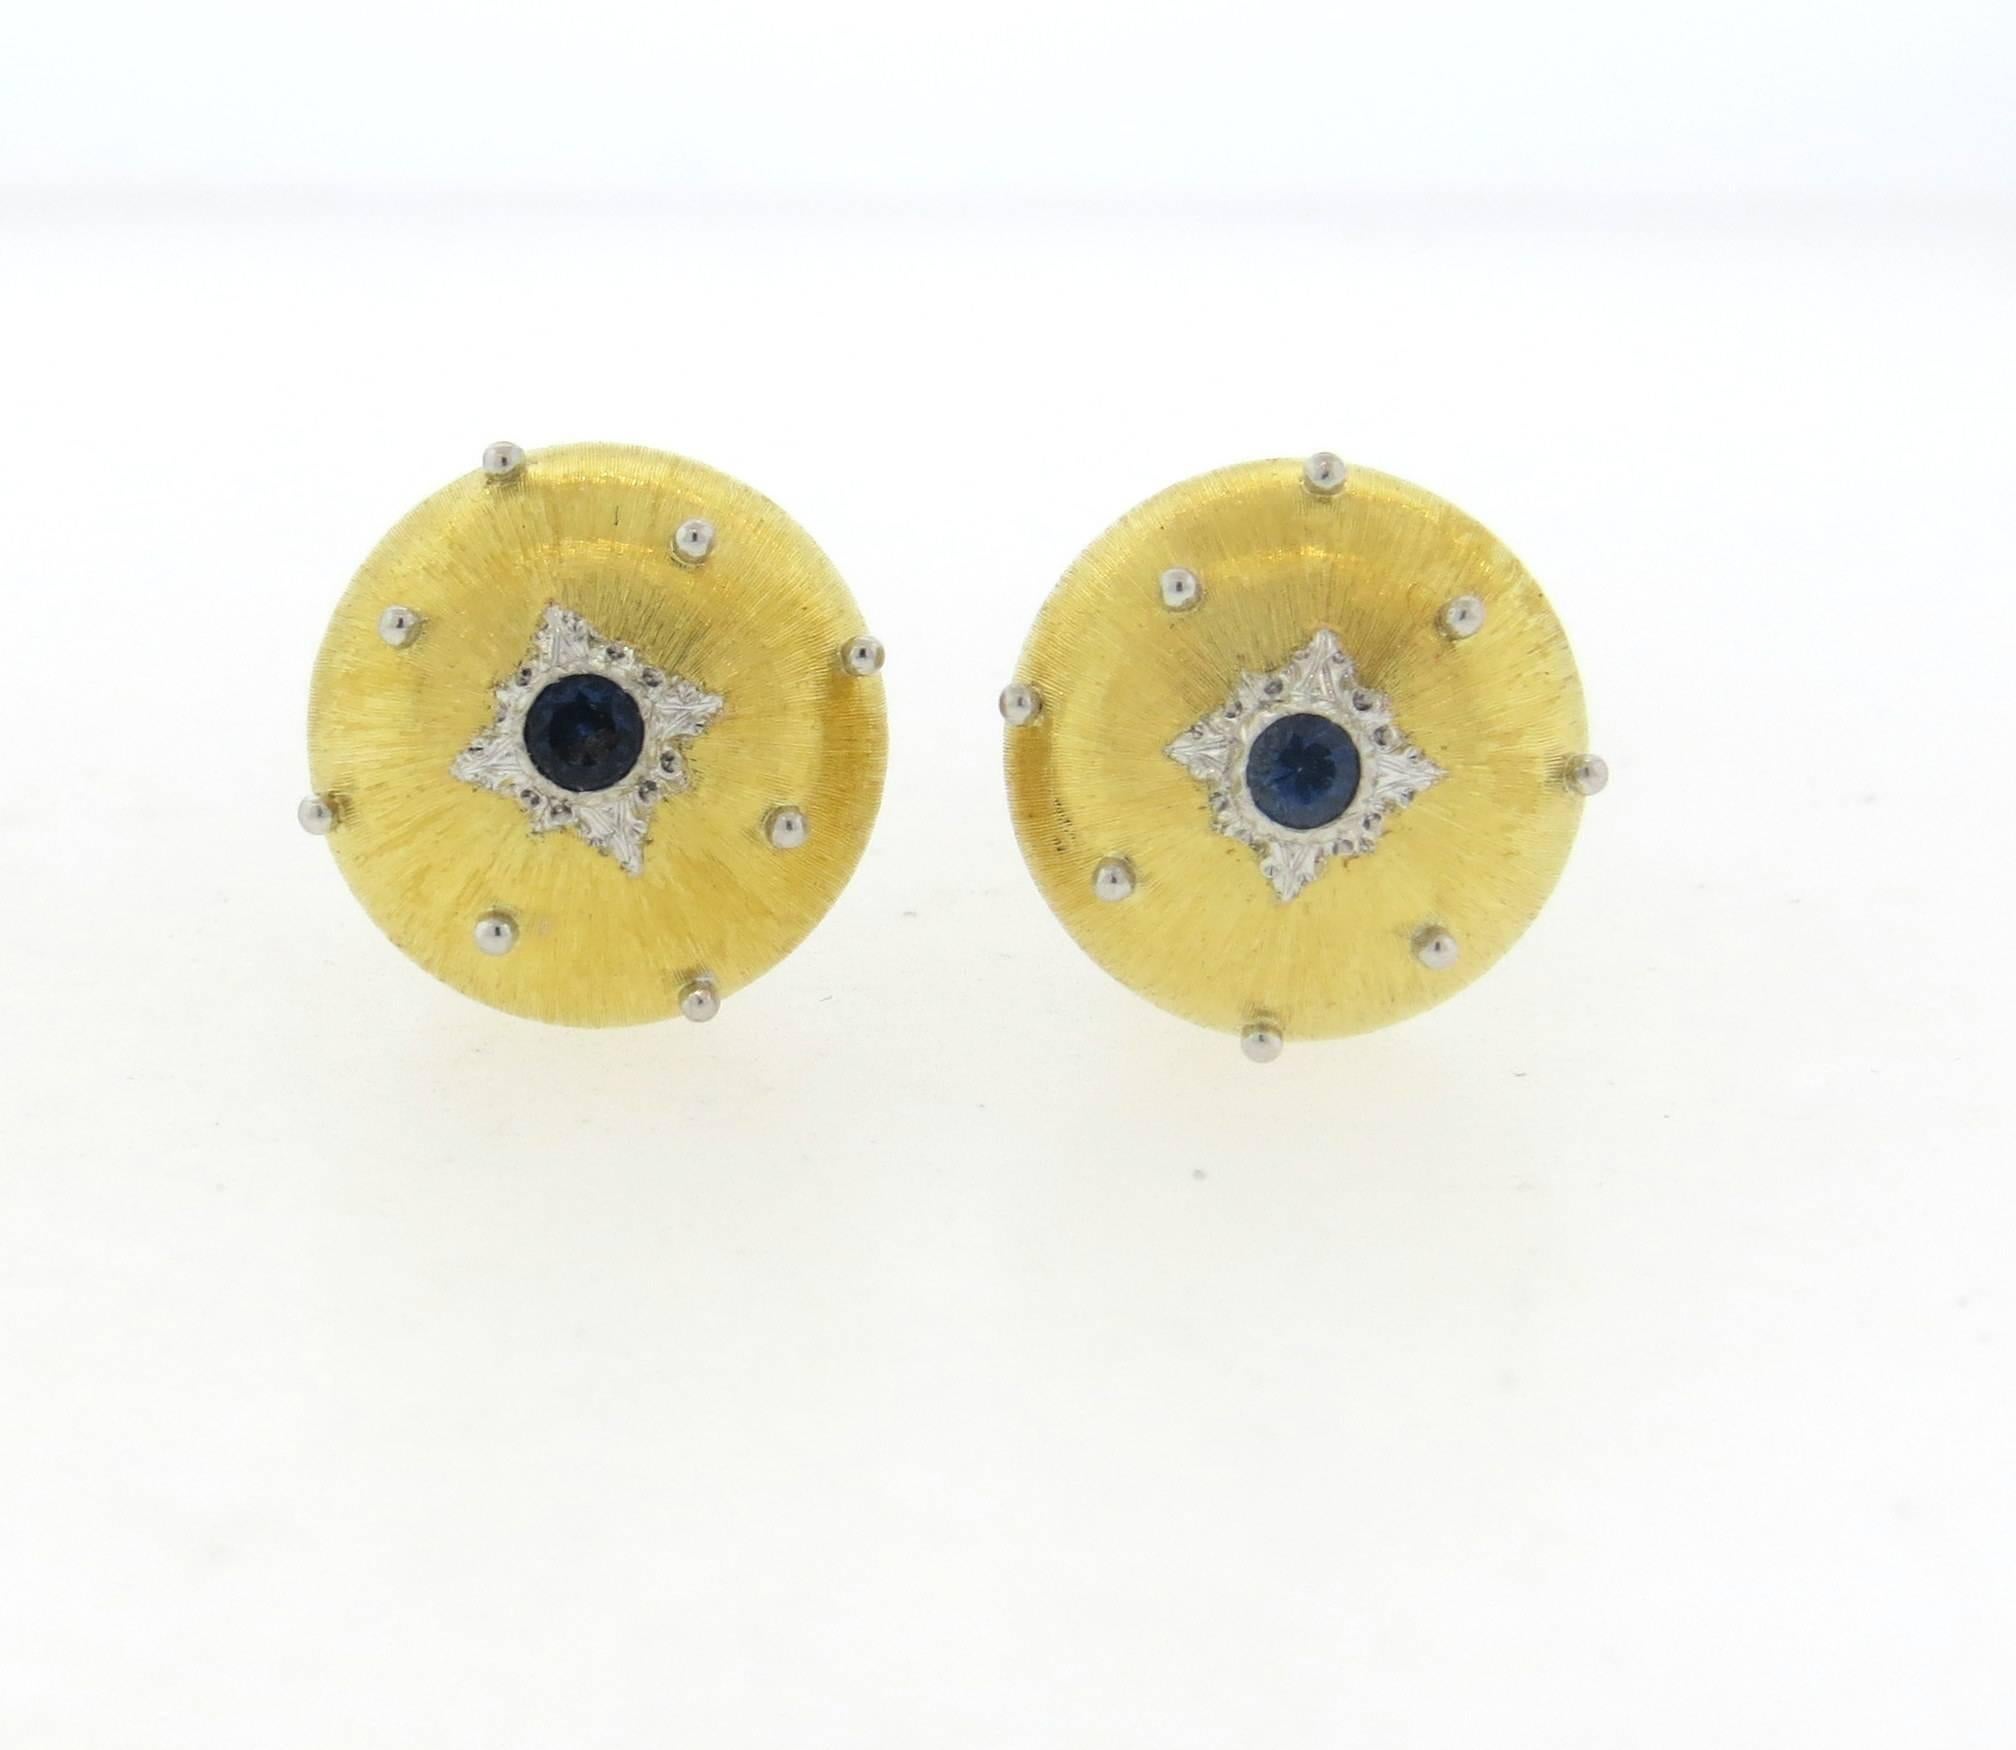 A pair of 18k yellow and white gold button earrings, crafted by Buccellati, set with blue sapphires in the center. Earrings are 16mm in diameter . Marked: Buccellati, Italy 18k G5500. Weight - 12.9 grams 